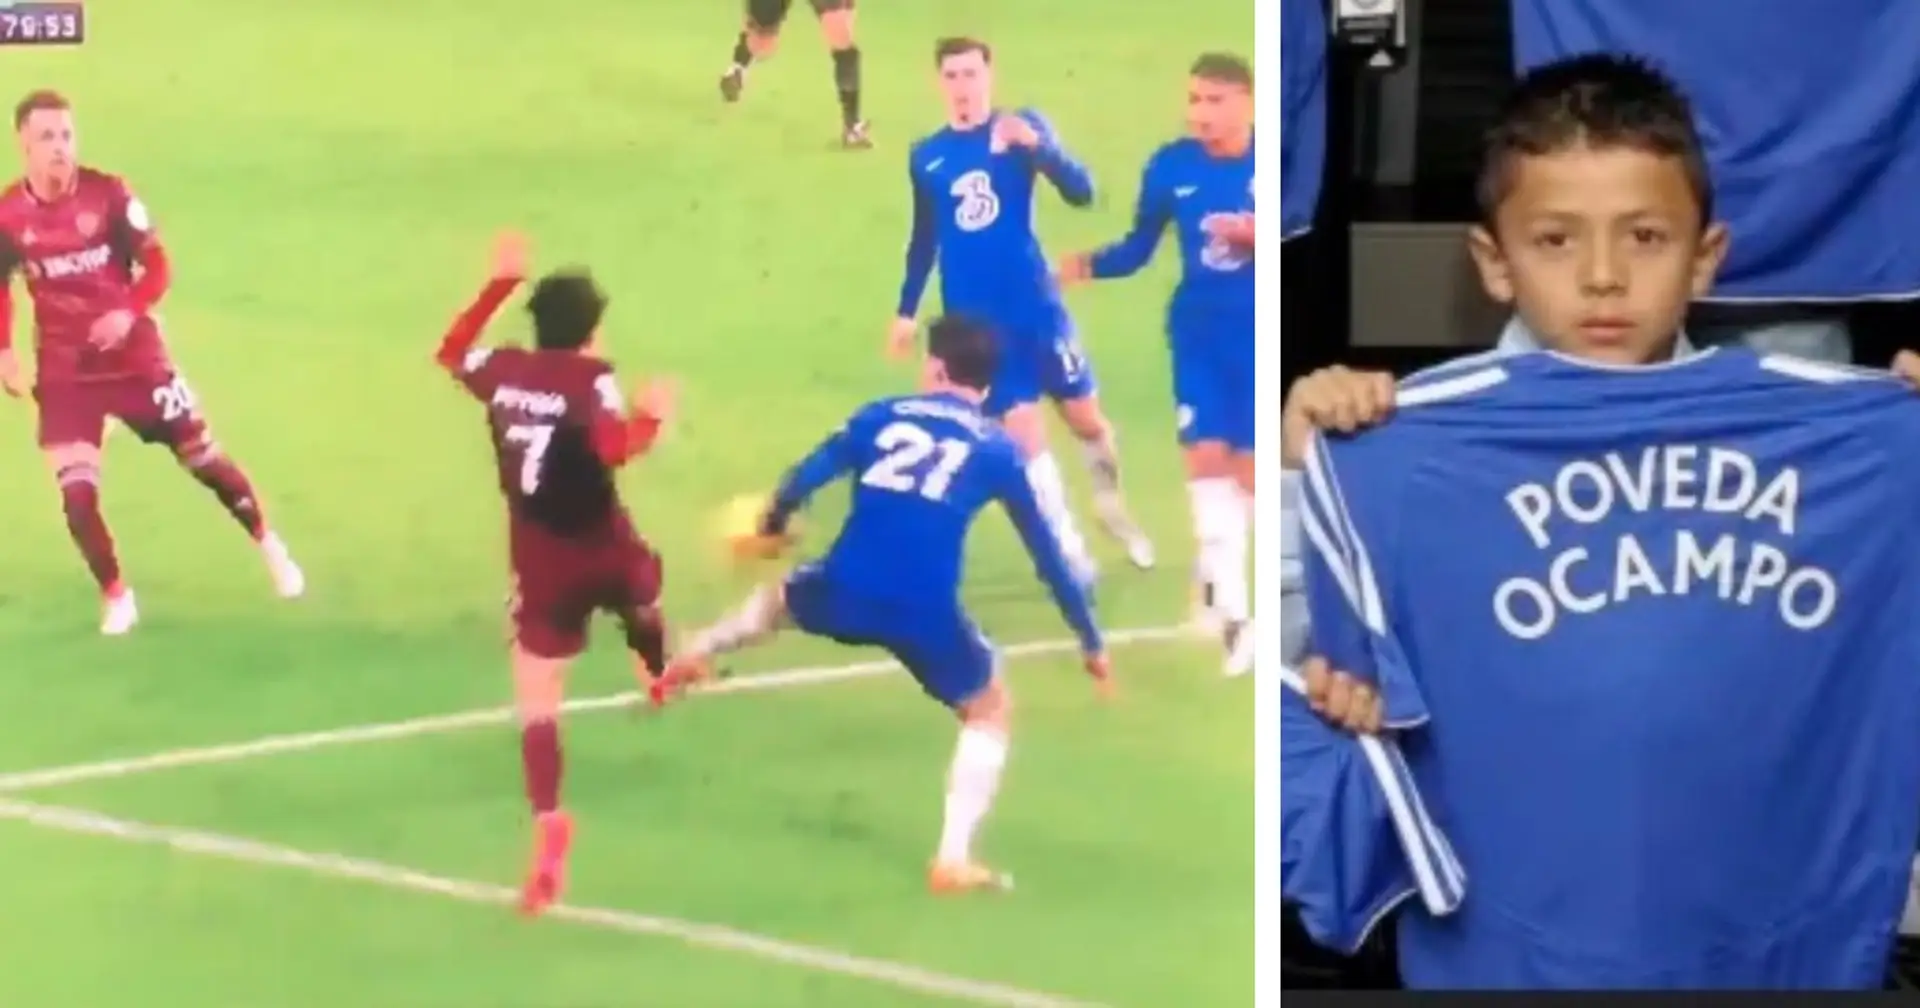 'A moment to appreciate Poveda, could've easily dived in the box': Chelsea fans praise Leeds winger after Chilwell penalty shout